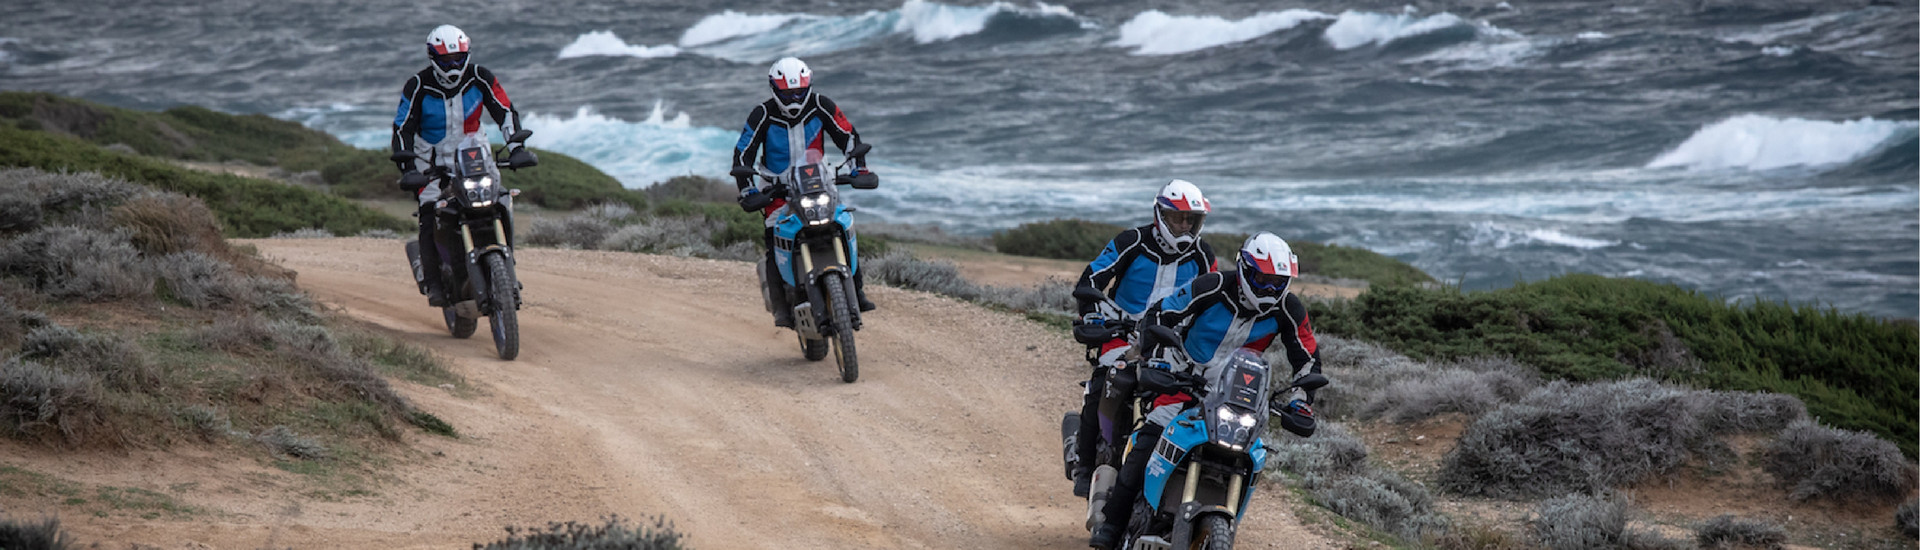 Dainese Off-Road Class